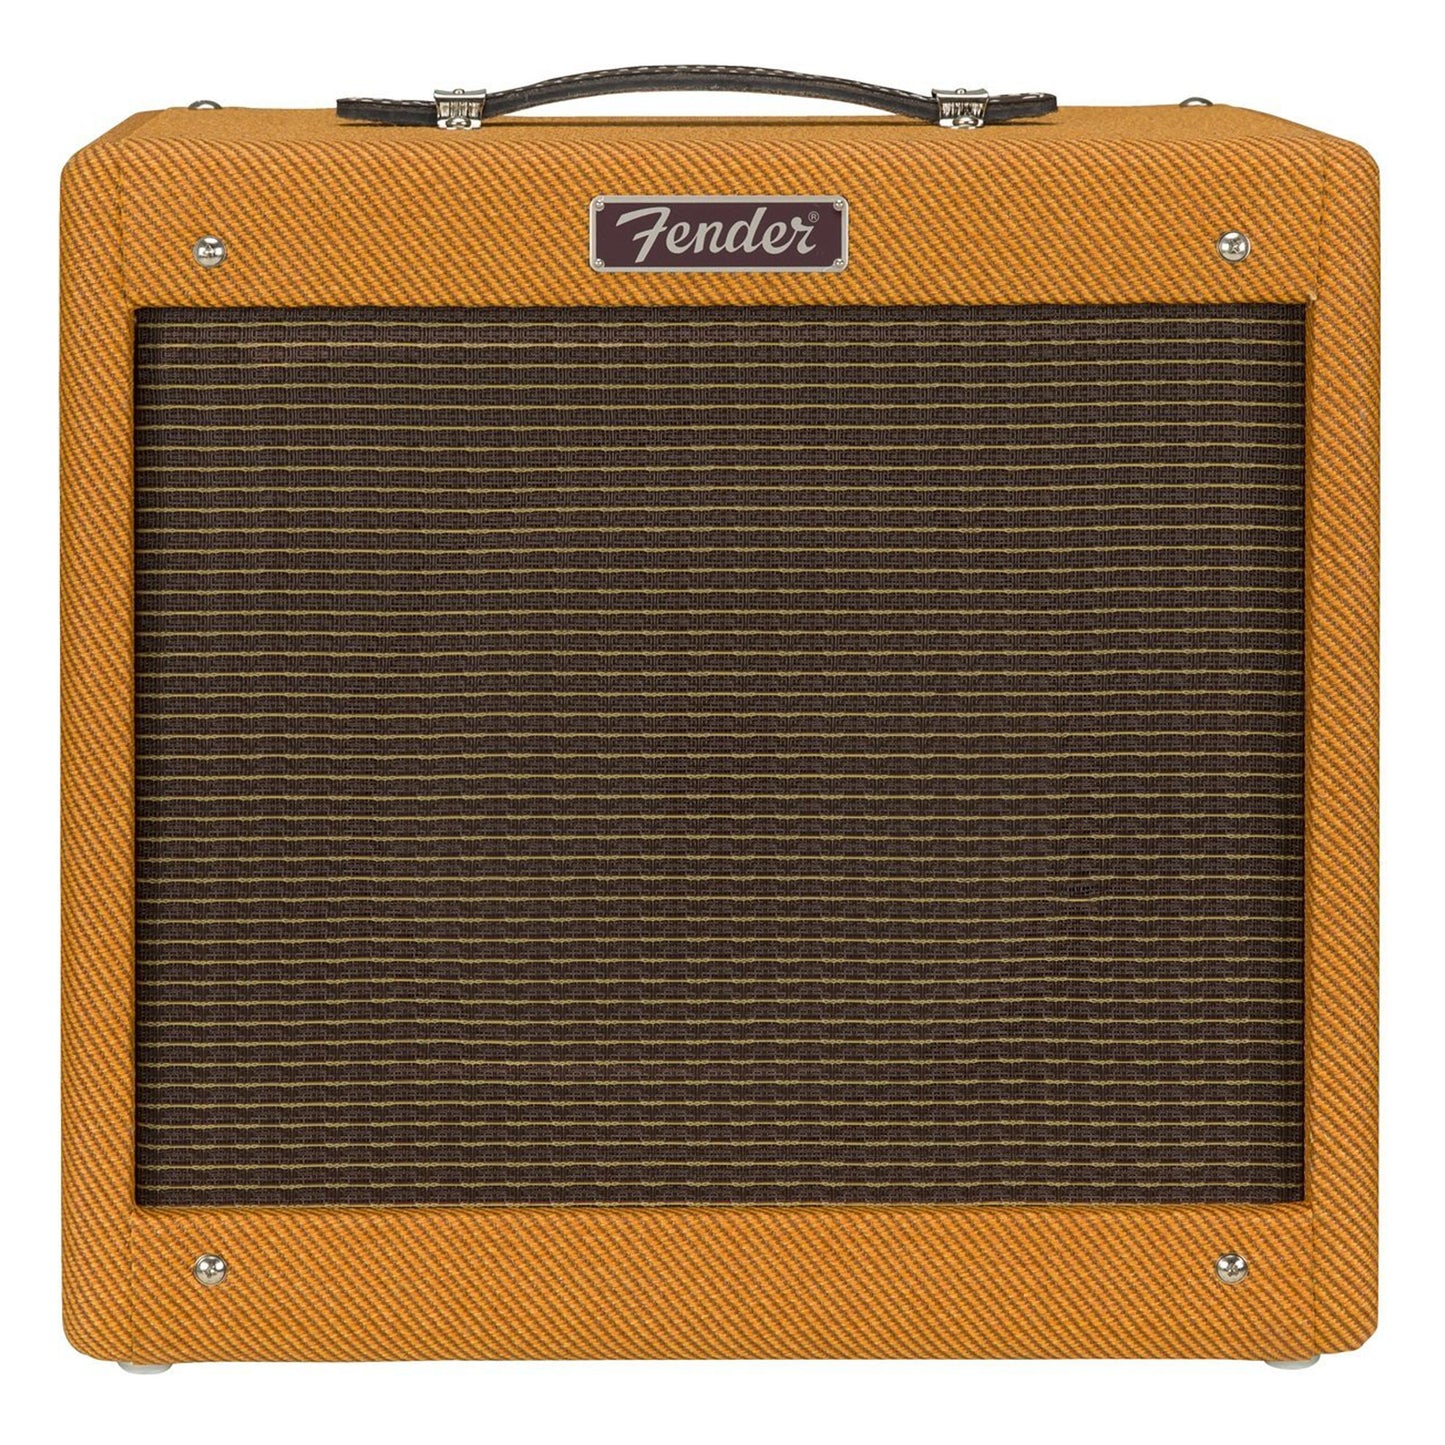 Fender Pro Junior IV 1x10” Tube Guitar Combo Amplifier in Lacquered Tweed